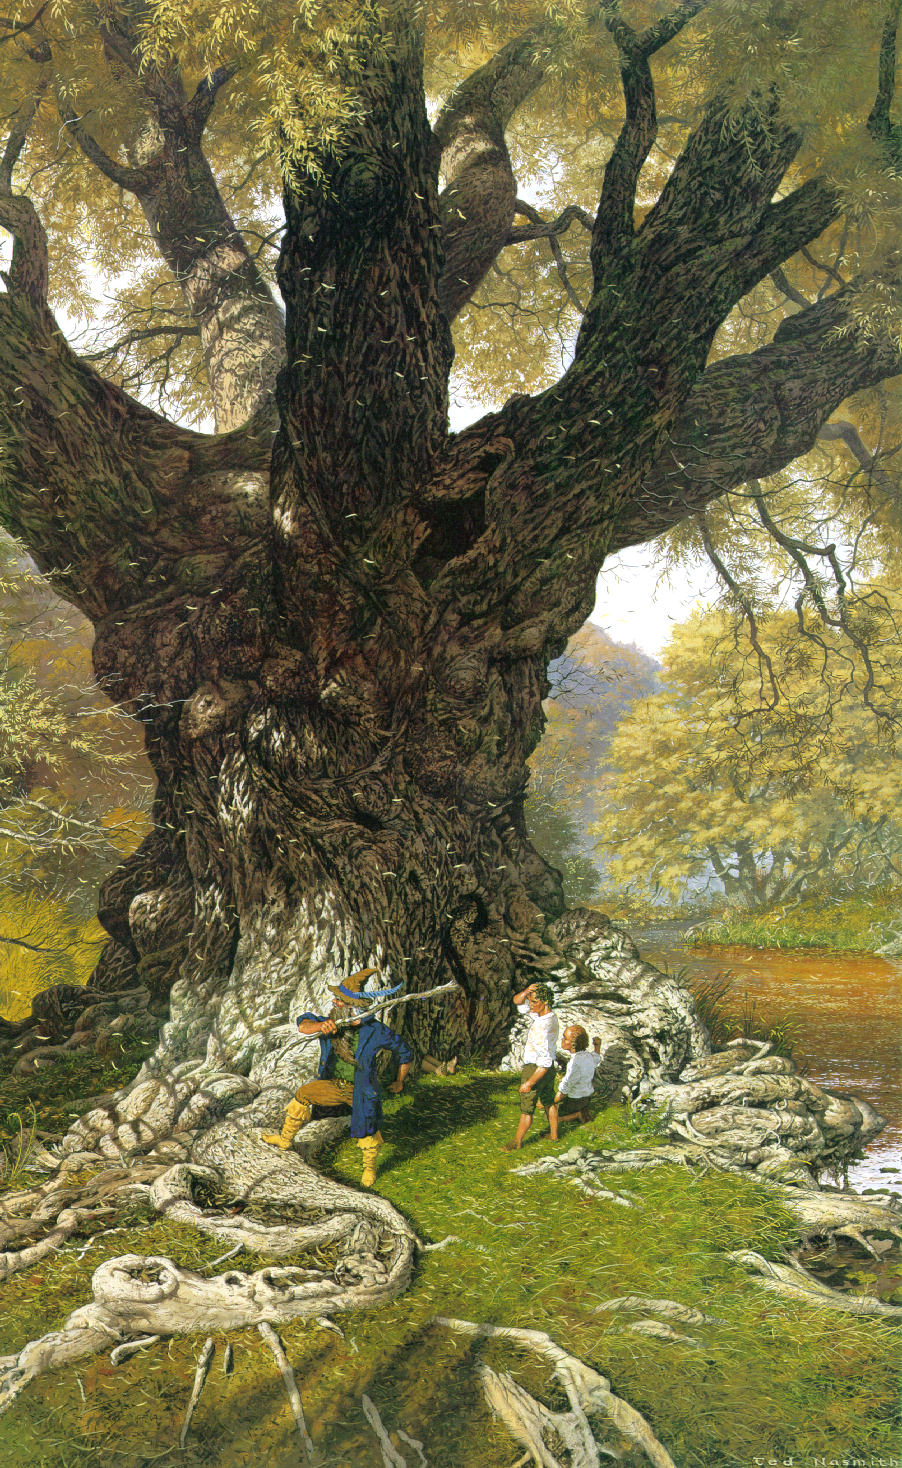 Ted Nasmith | Le Seigneur des Anneaux | The Willow-man is Tamed